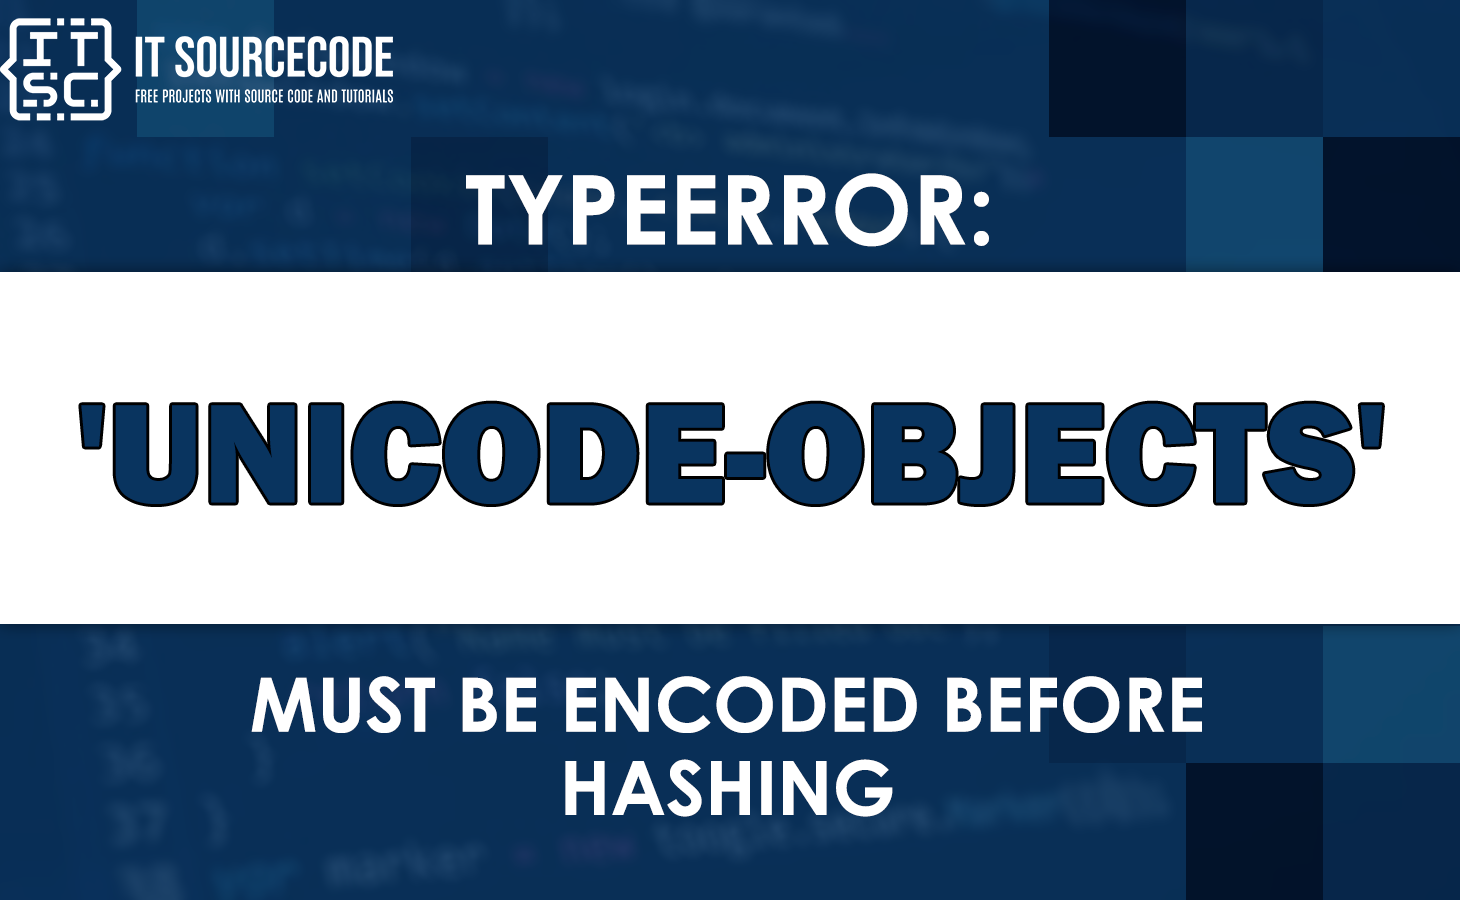 Typeerror: unicode-objects must be encoded before hashing